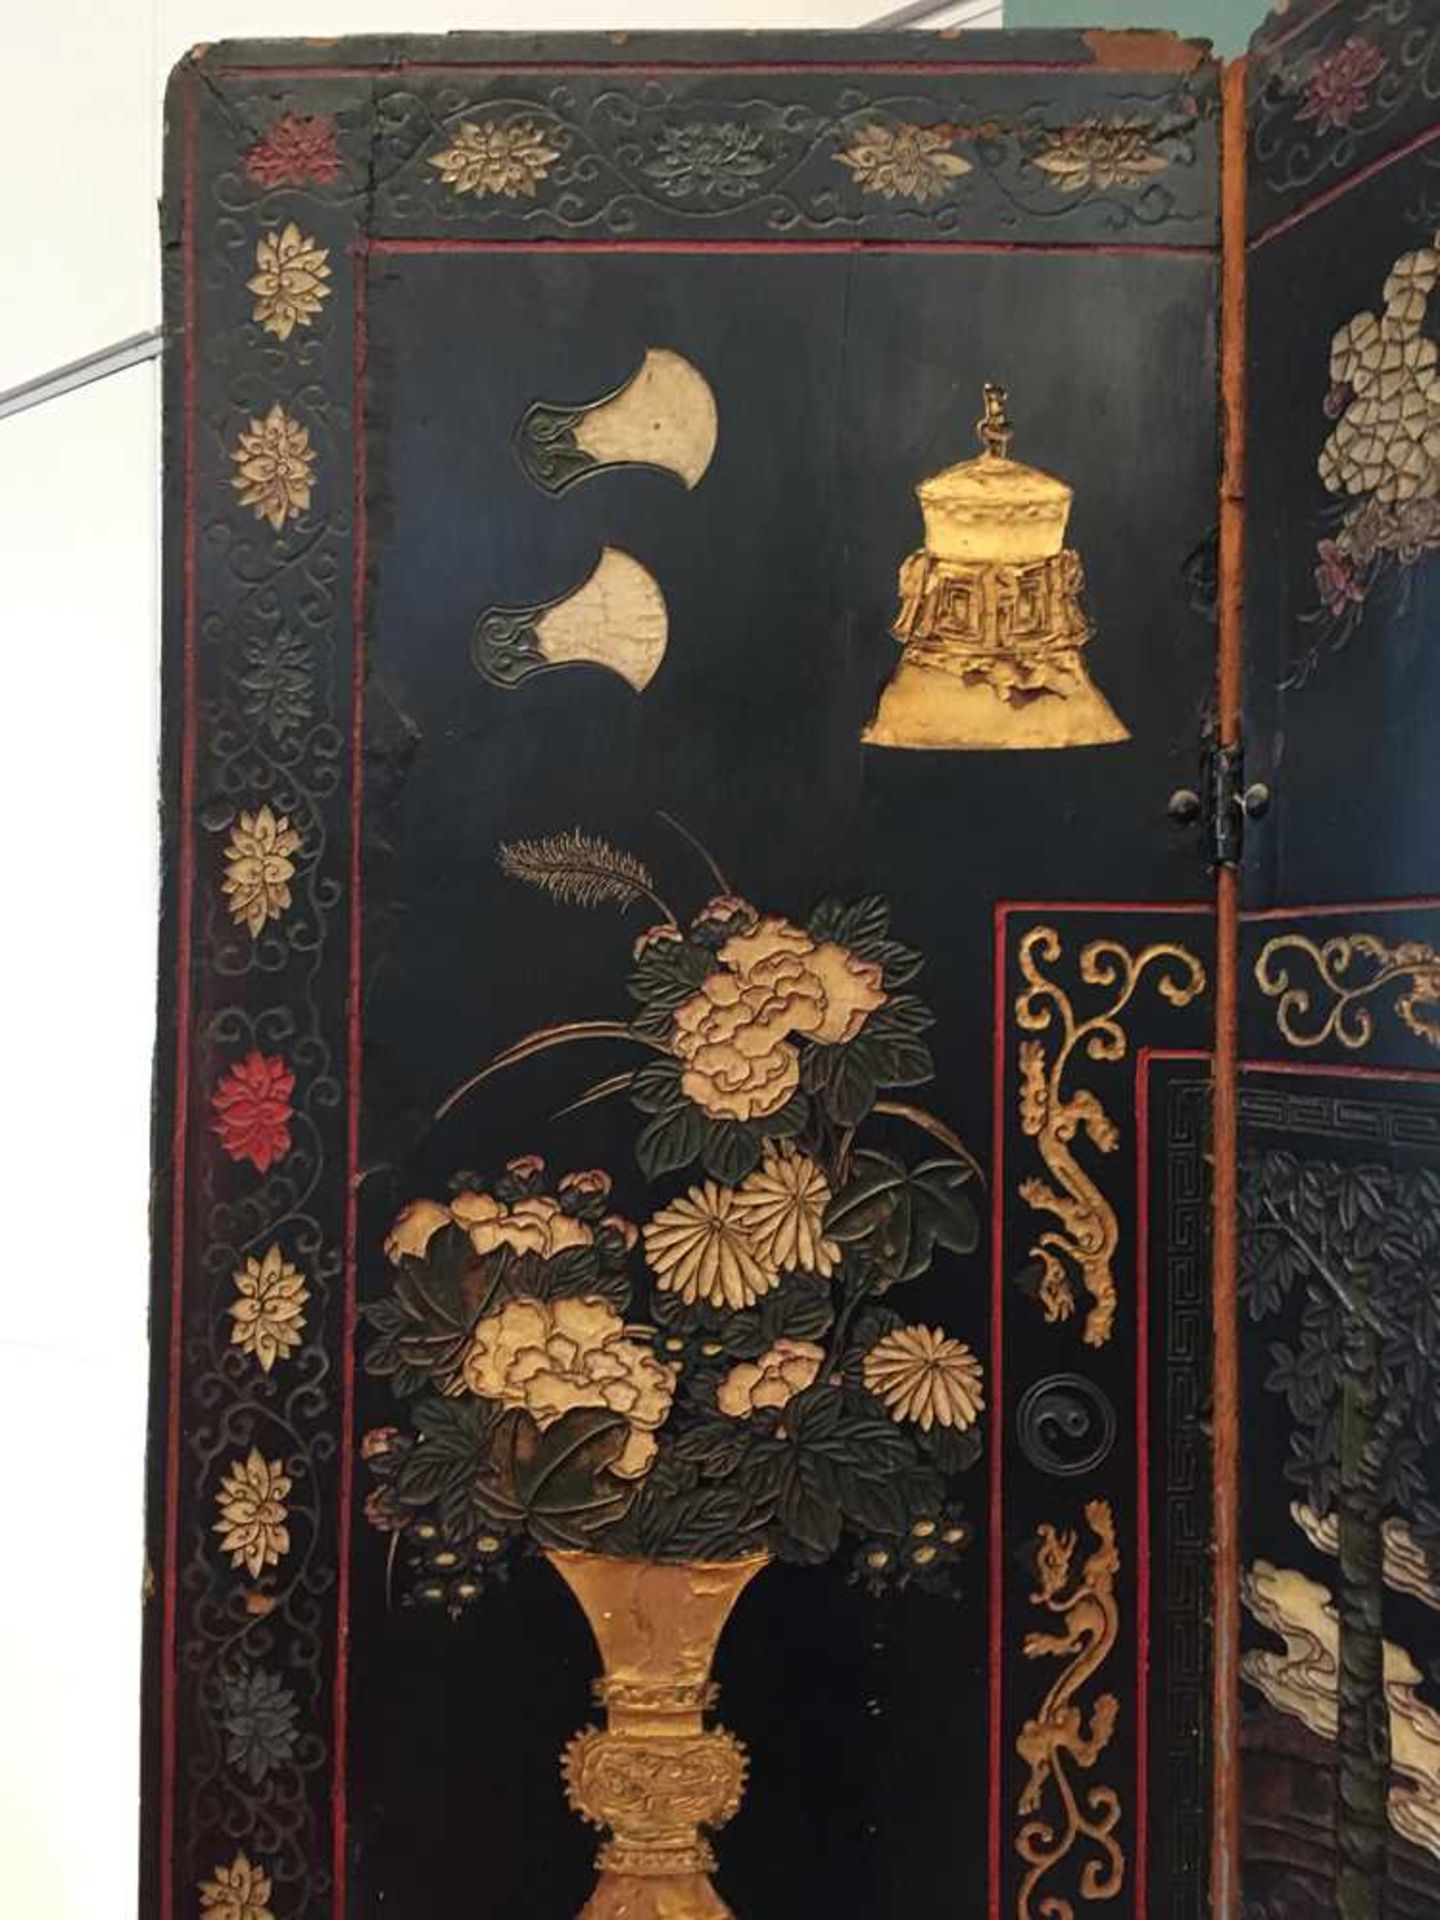 A CHINESE COROMANDEL BLACK LACQUER TWELVE-PANEL SCREEN QING DYNASTY, 18TH CENTURY - Image 6 of 72